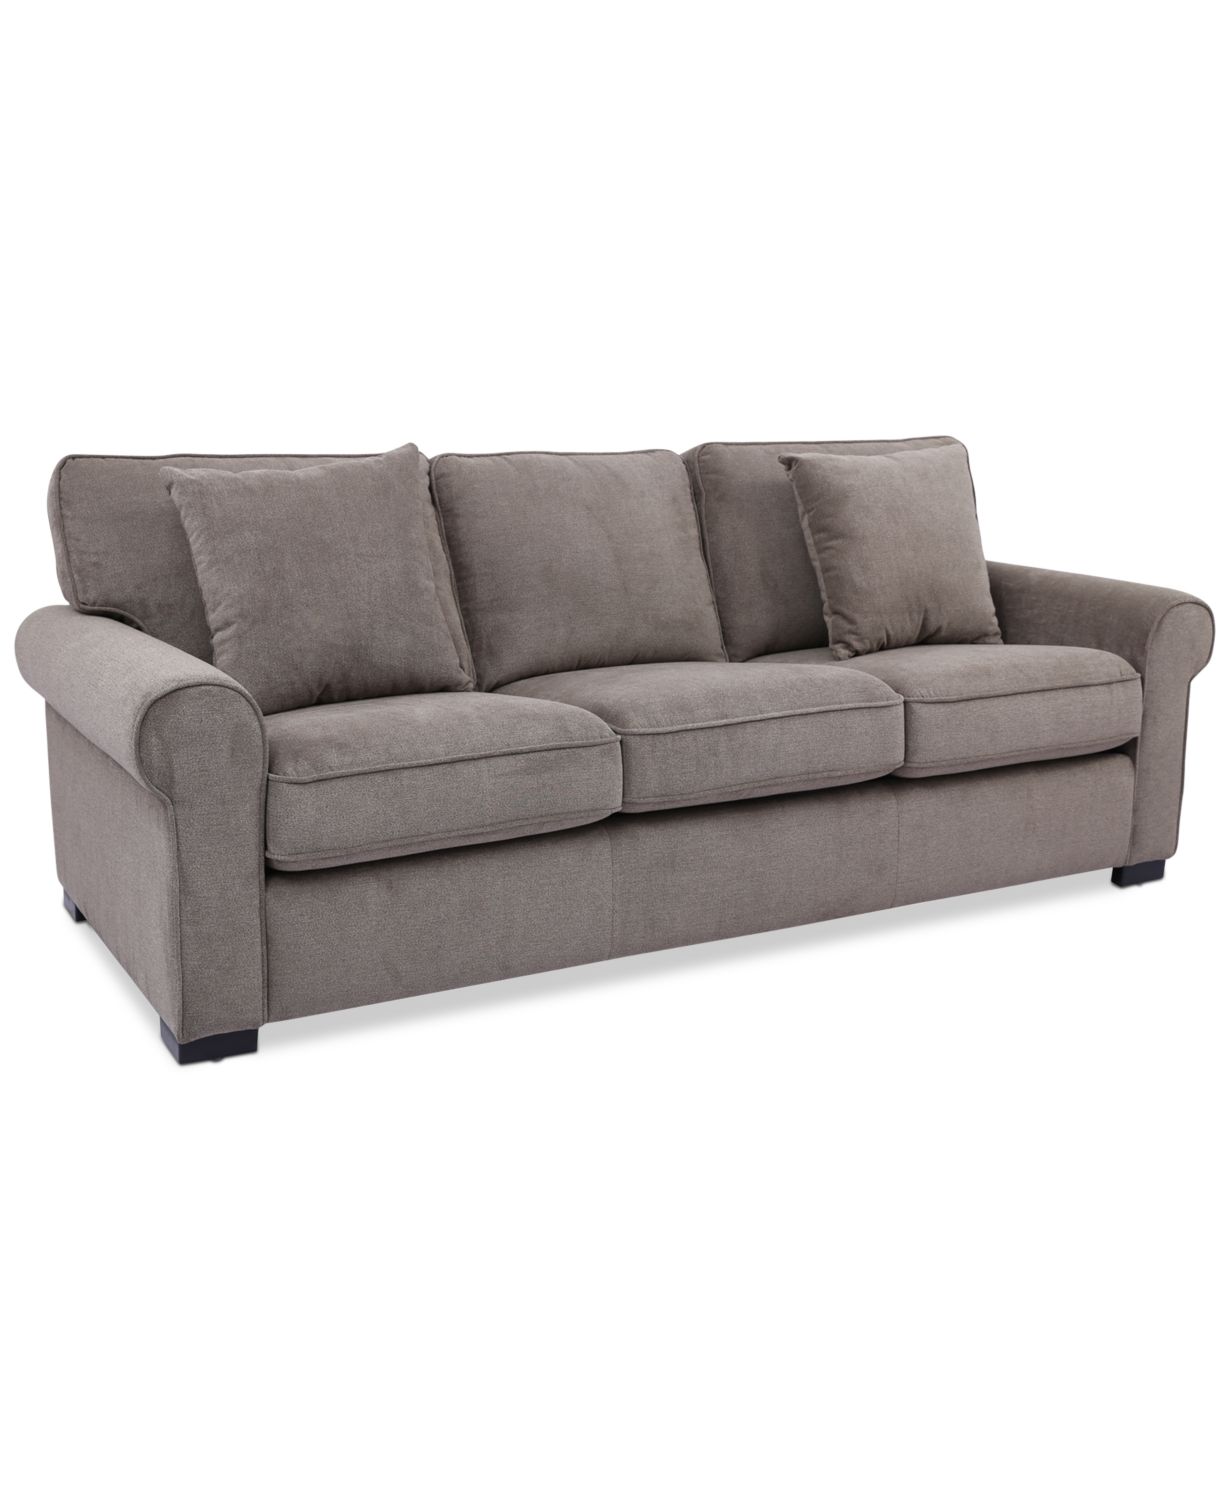 Ladlow 90" Fabric Sofa (Open Gray or Light Brown) $479 + Delivery